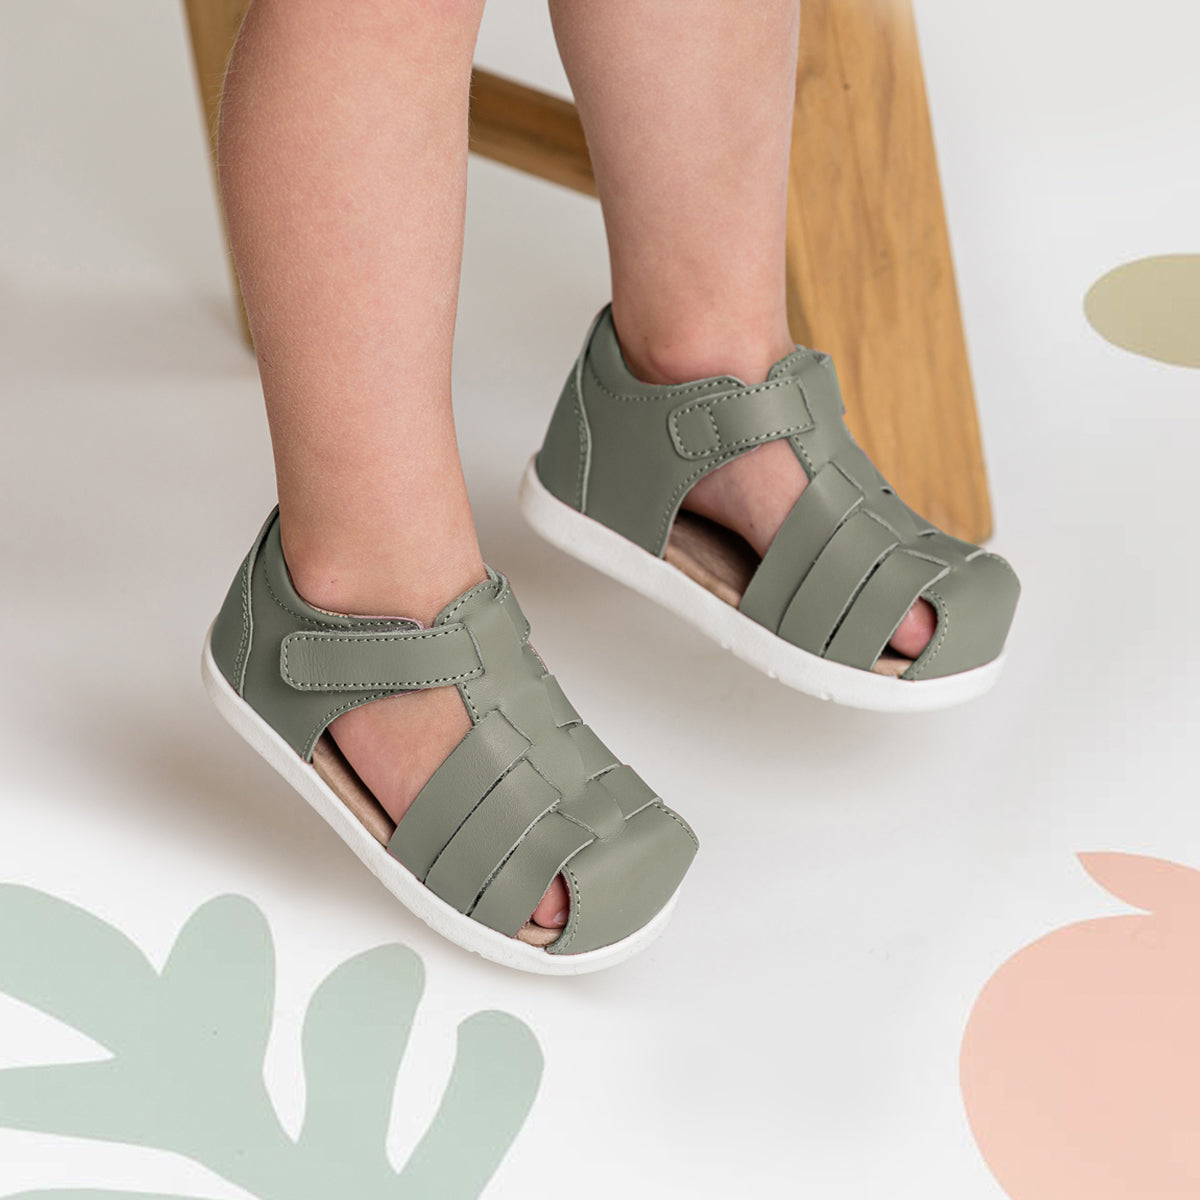 Child wearing pair of Billie sandal in colour Olive